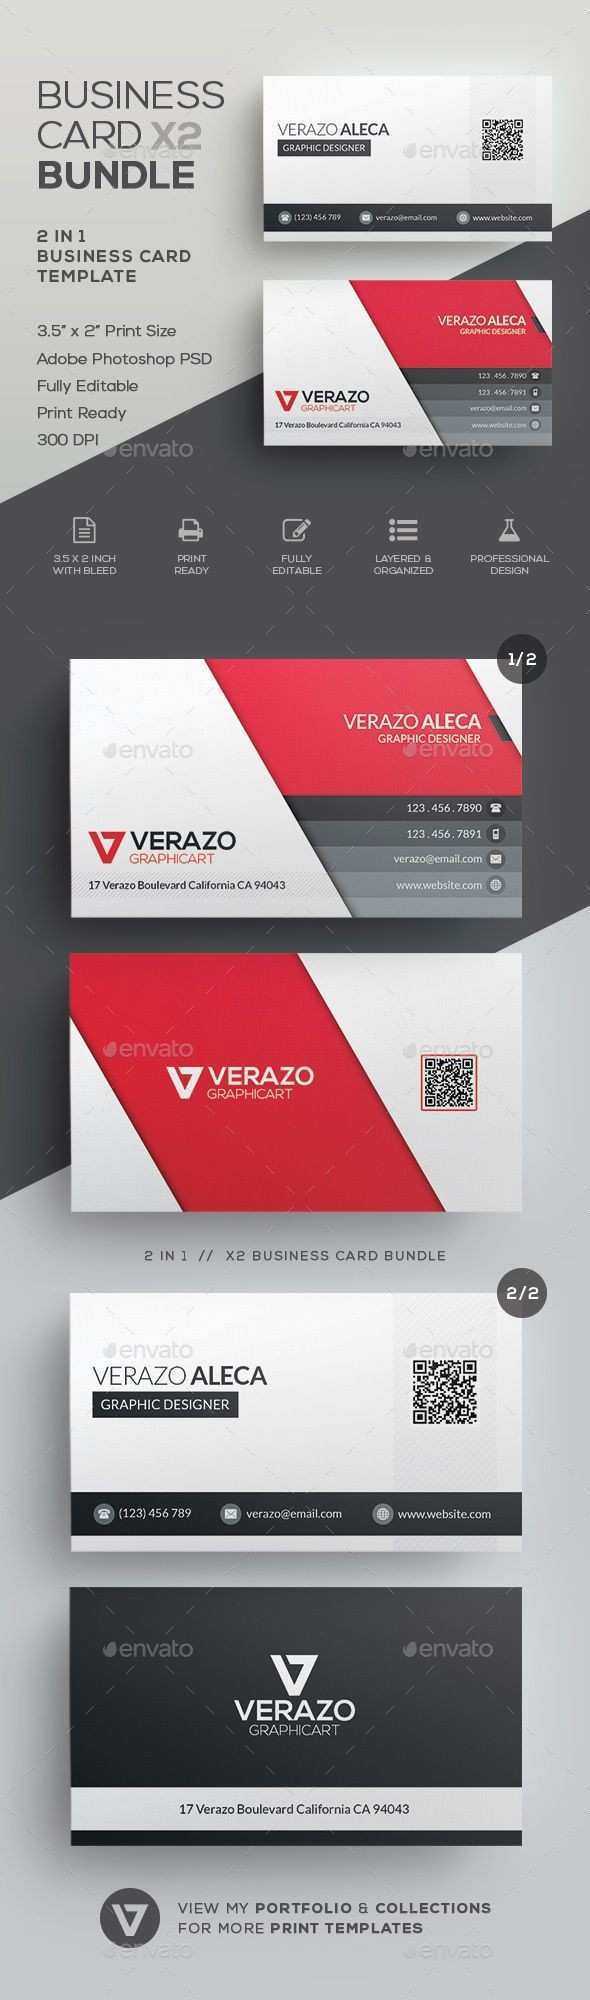 Download Ibm Business Card Template Free – Cards Design Throughout Ibm Business Card Template